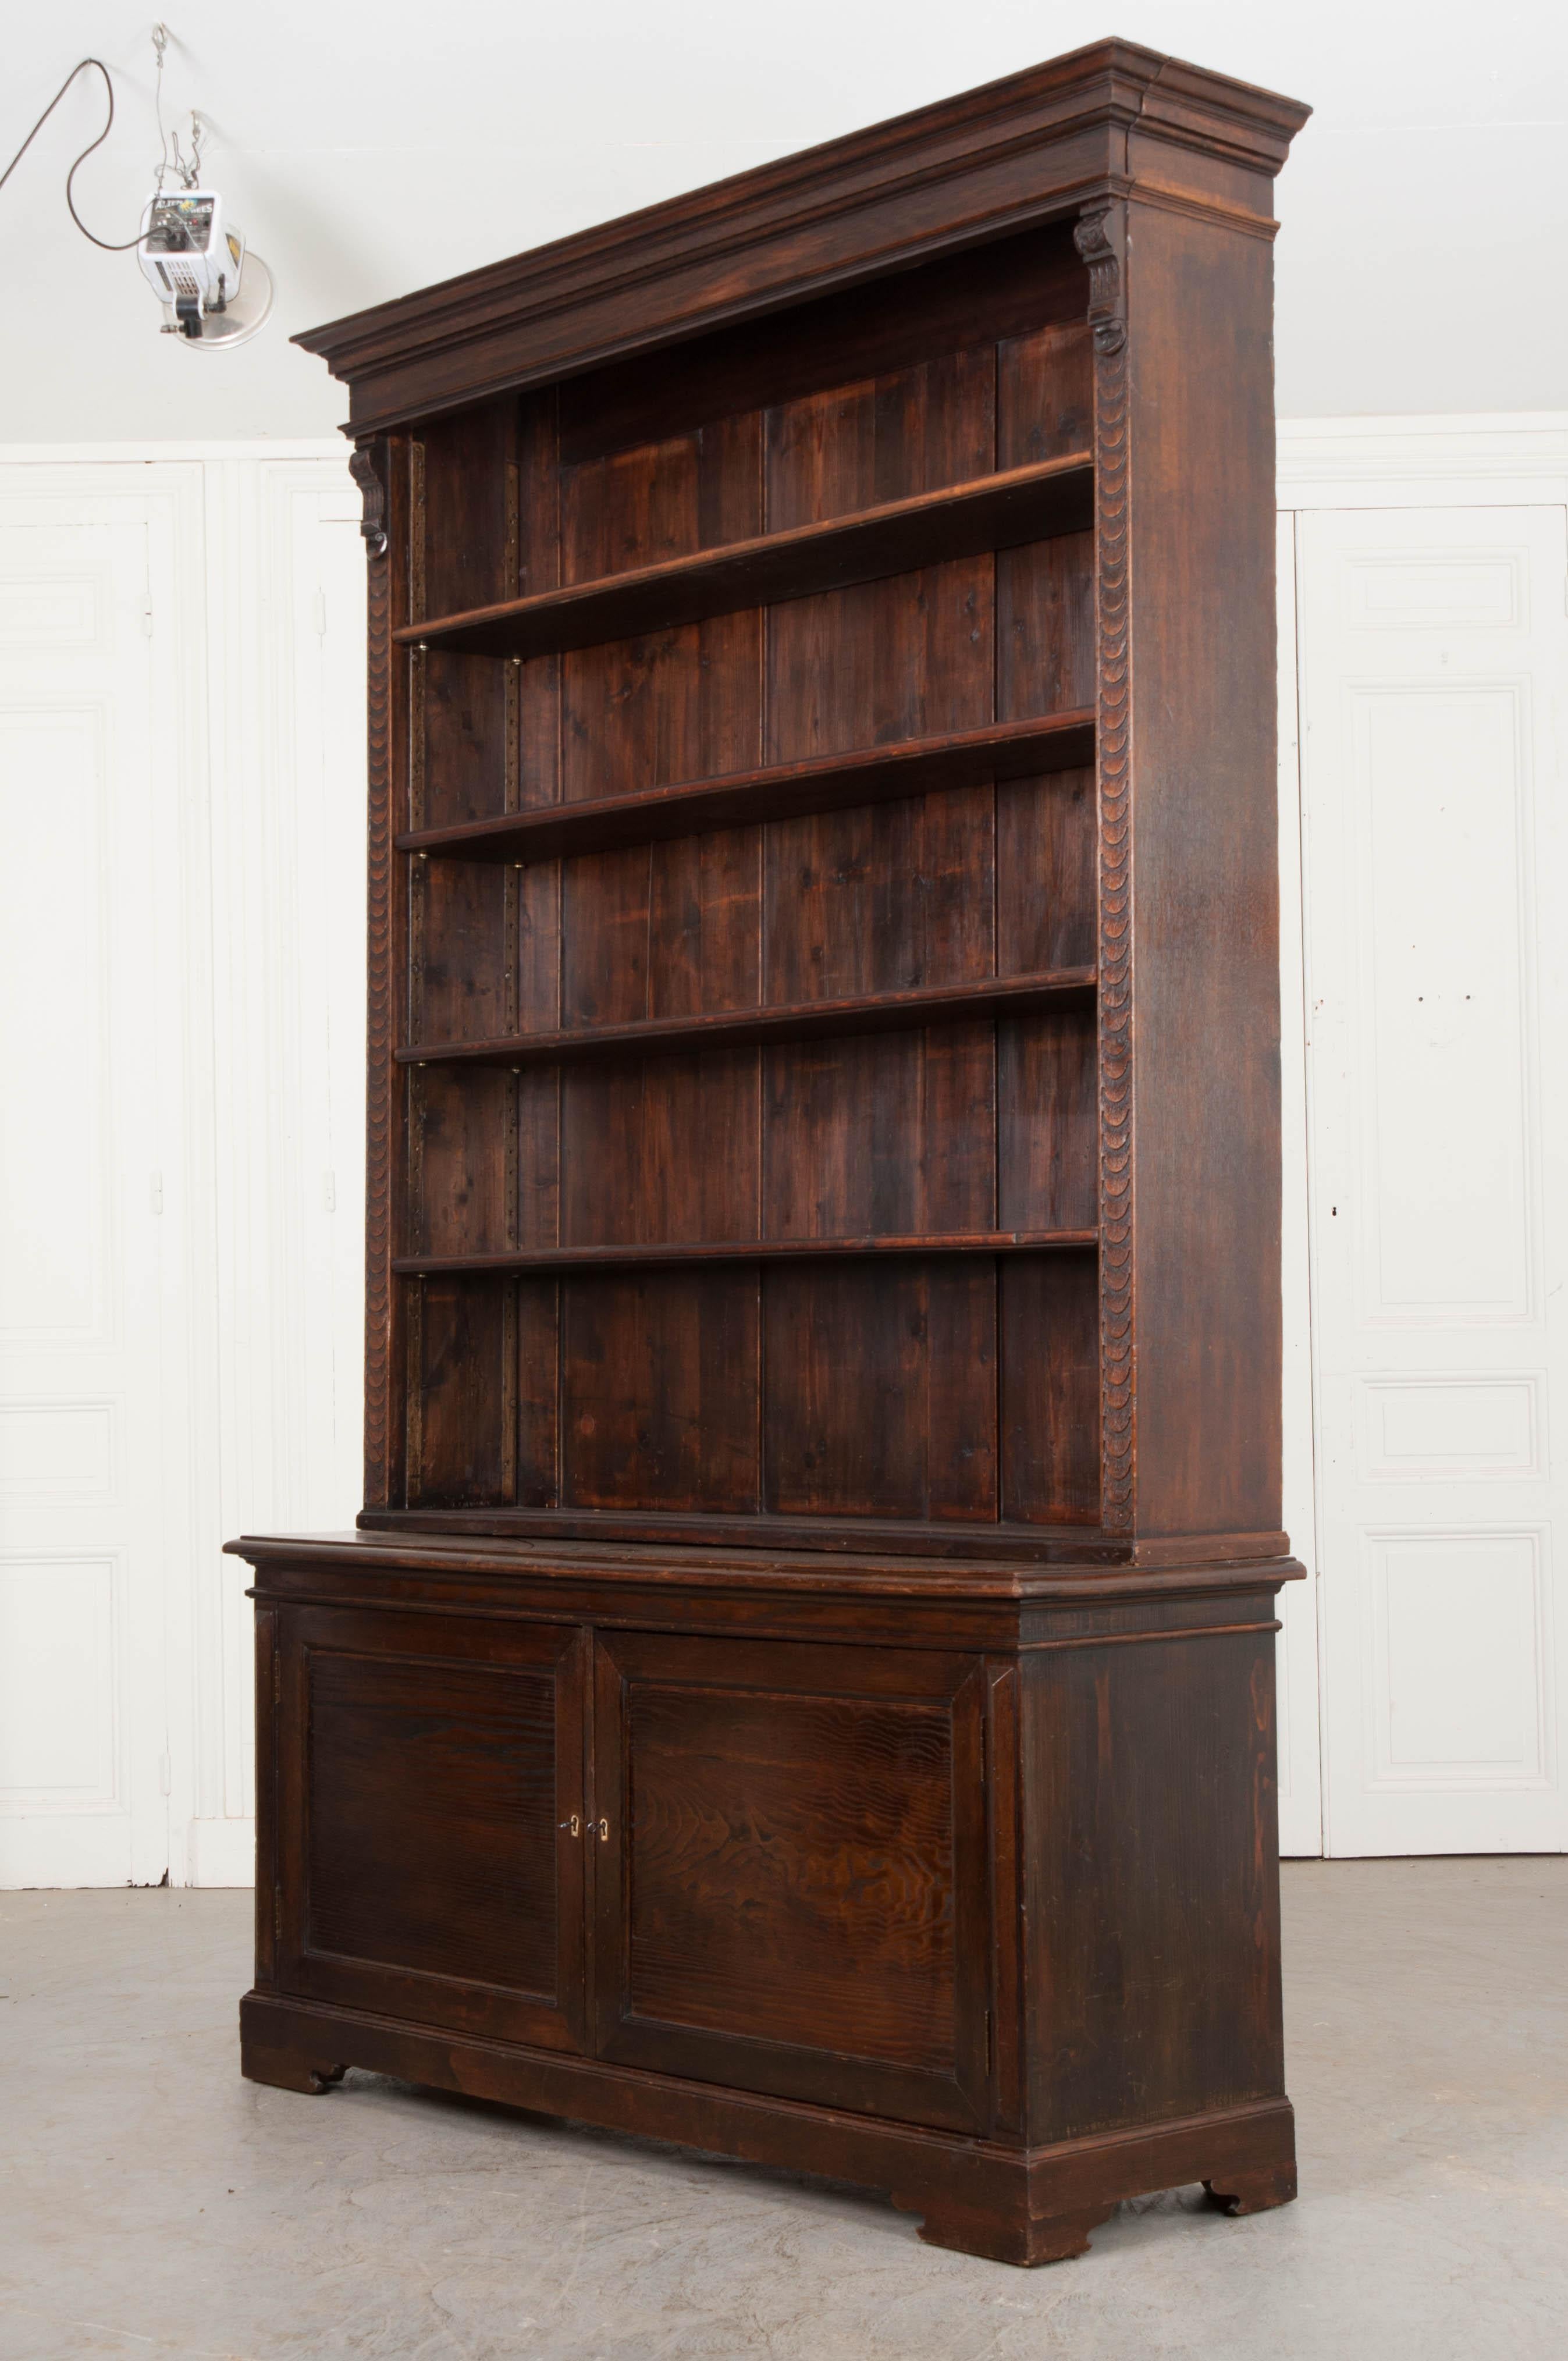 This impressive and large oak bookcase is from the Netherlands, circa 1860s, and breaks down into two pieces. The cornice’s front is hinged for ease of storing larger pieces and is likely a later addition. It rests above four adjustable shelves and